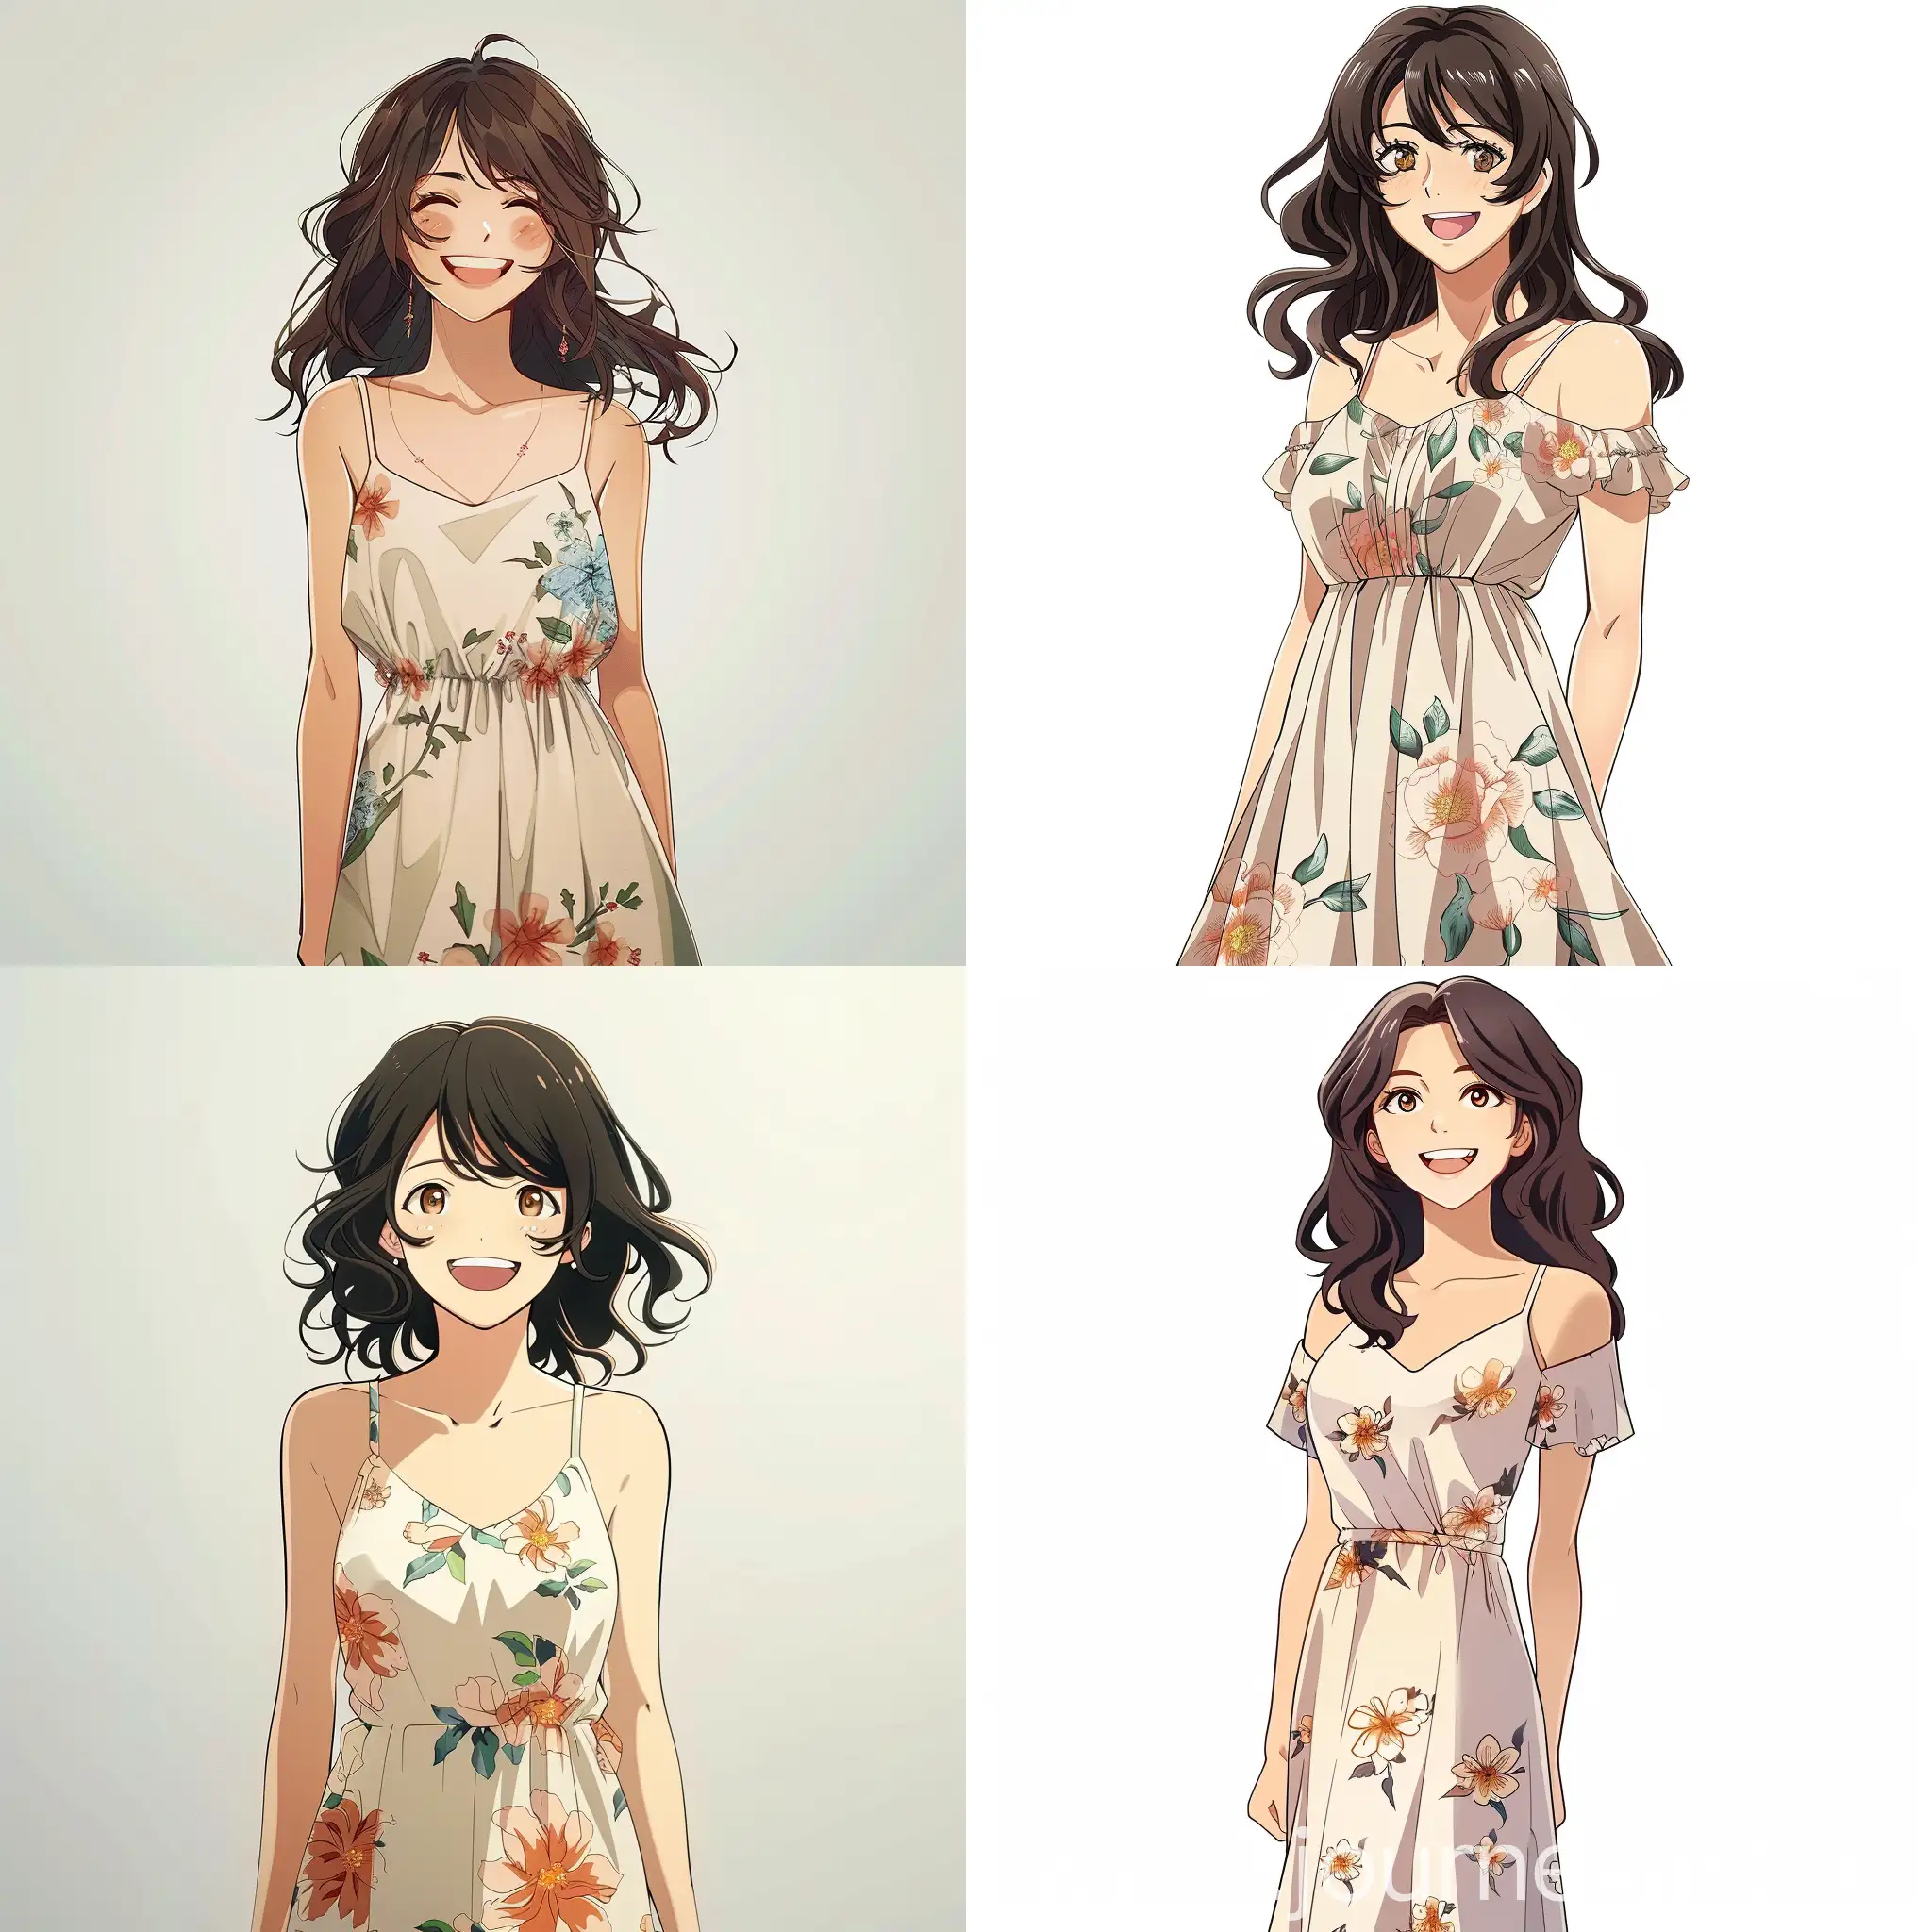 Cheerful-Anime-Girl-in-Floral-Summer-Dress-with-Wavy-Brown-Hair